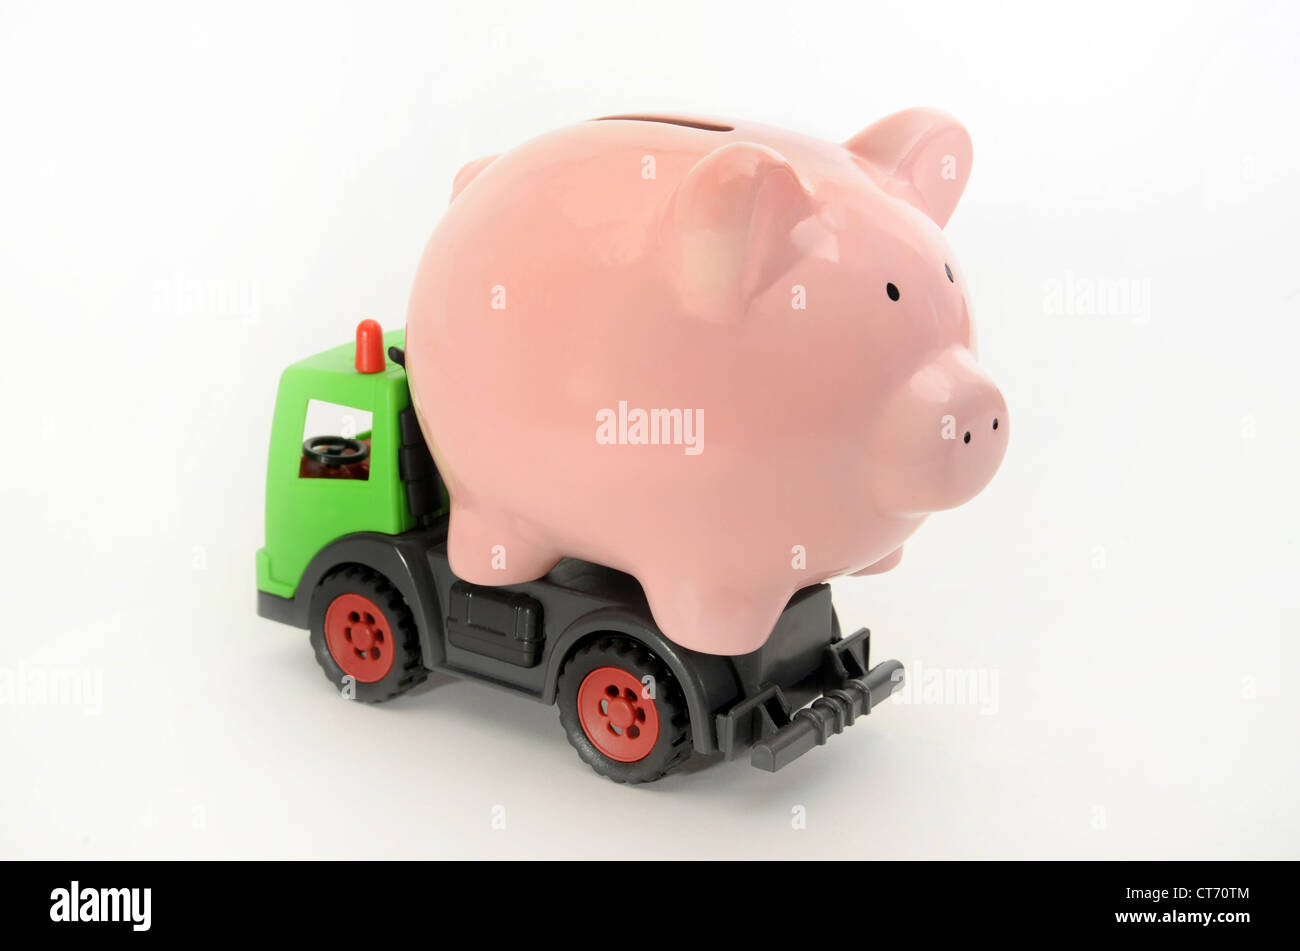 PIGGYBANK ON BACK OF TOY LORRY RE HOUSE MOVES MORTGAGES BANKS INCOME PAY COST PRICES HOUSE MOVING CASH SAVINGS PENSIONS DEBT UK Stock Photo